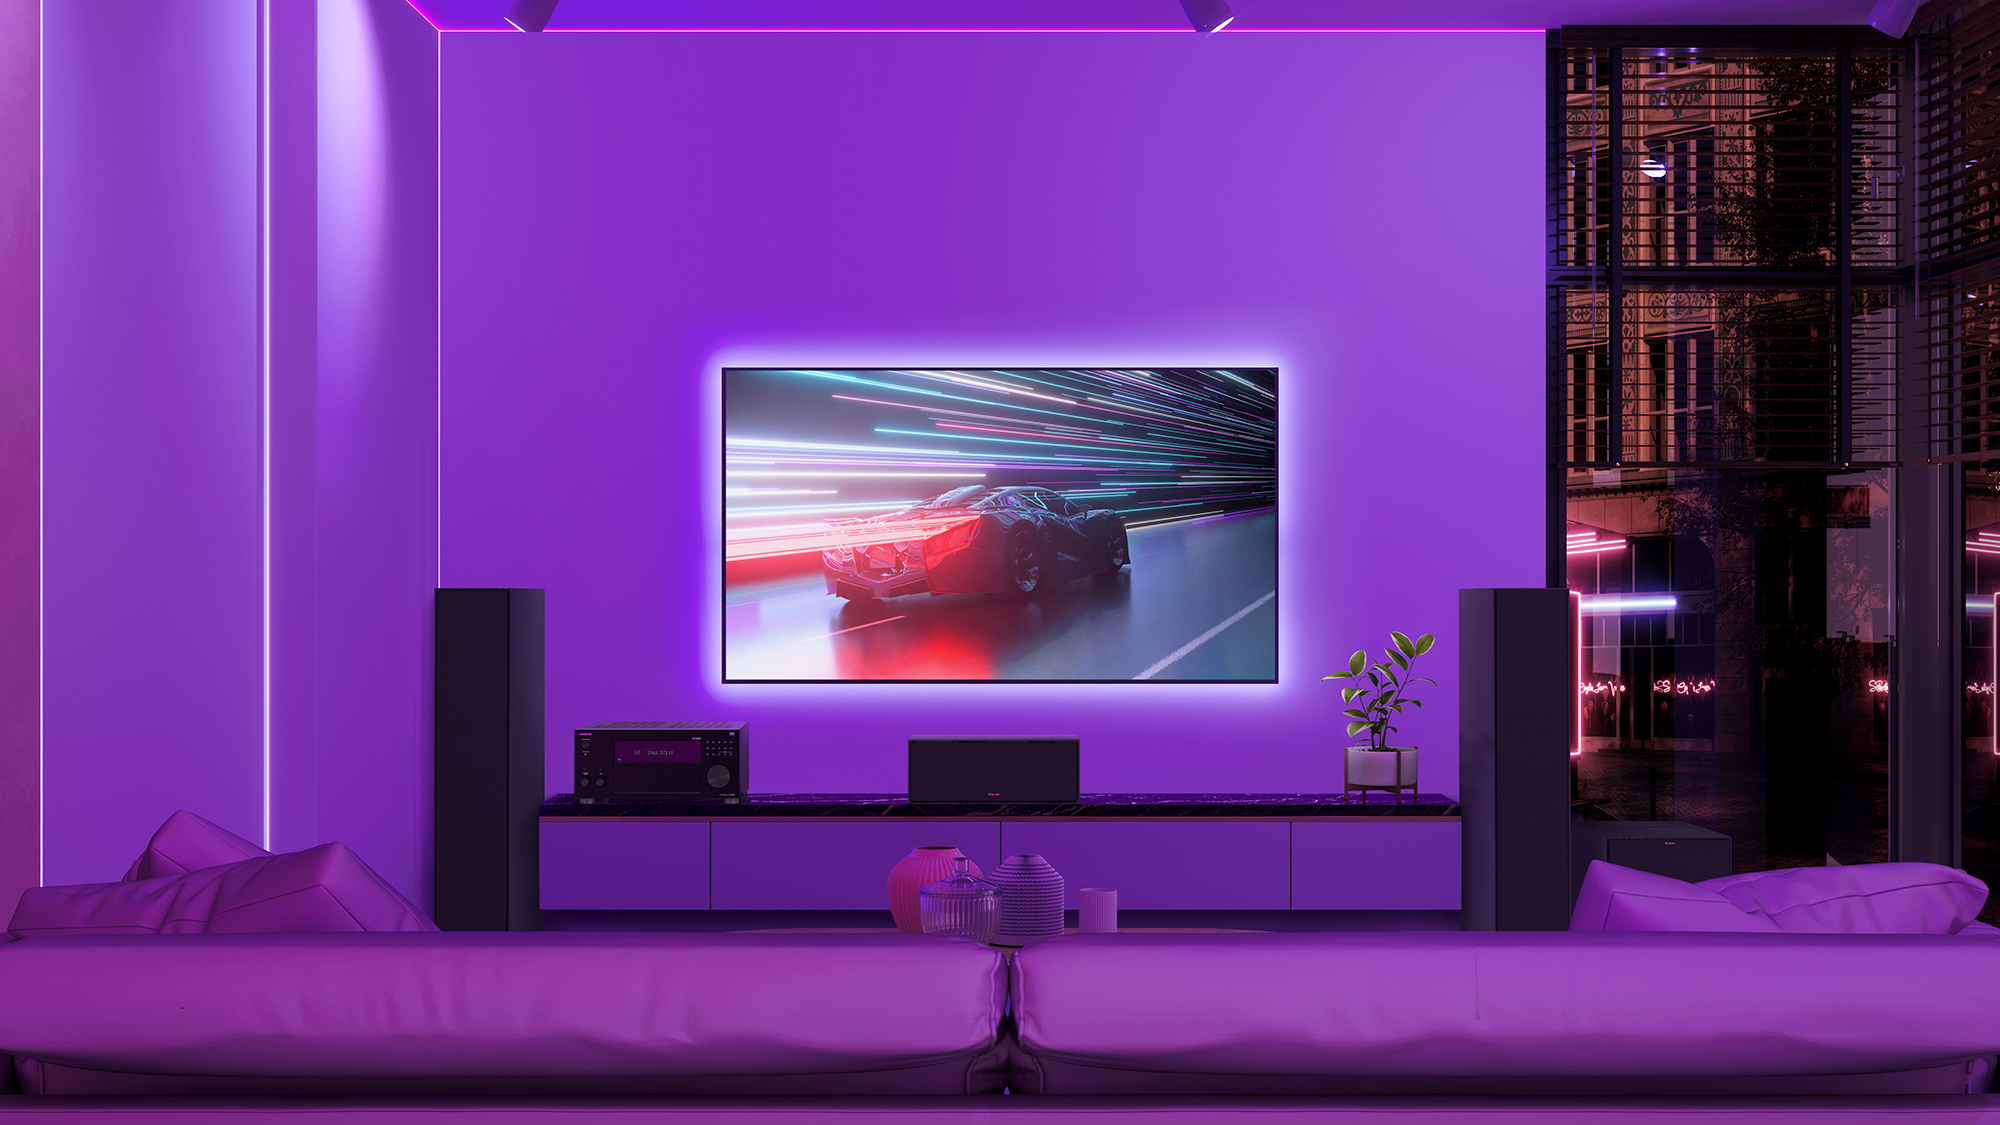 TX RZ70 and Klipsch Home Theater System in Purple LED Lit High Rise Condo 2000x1333